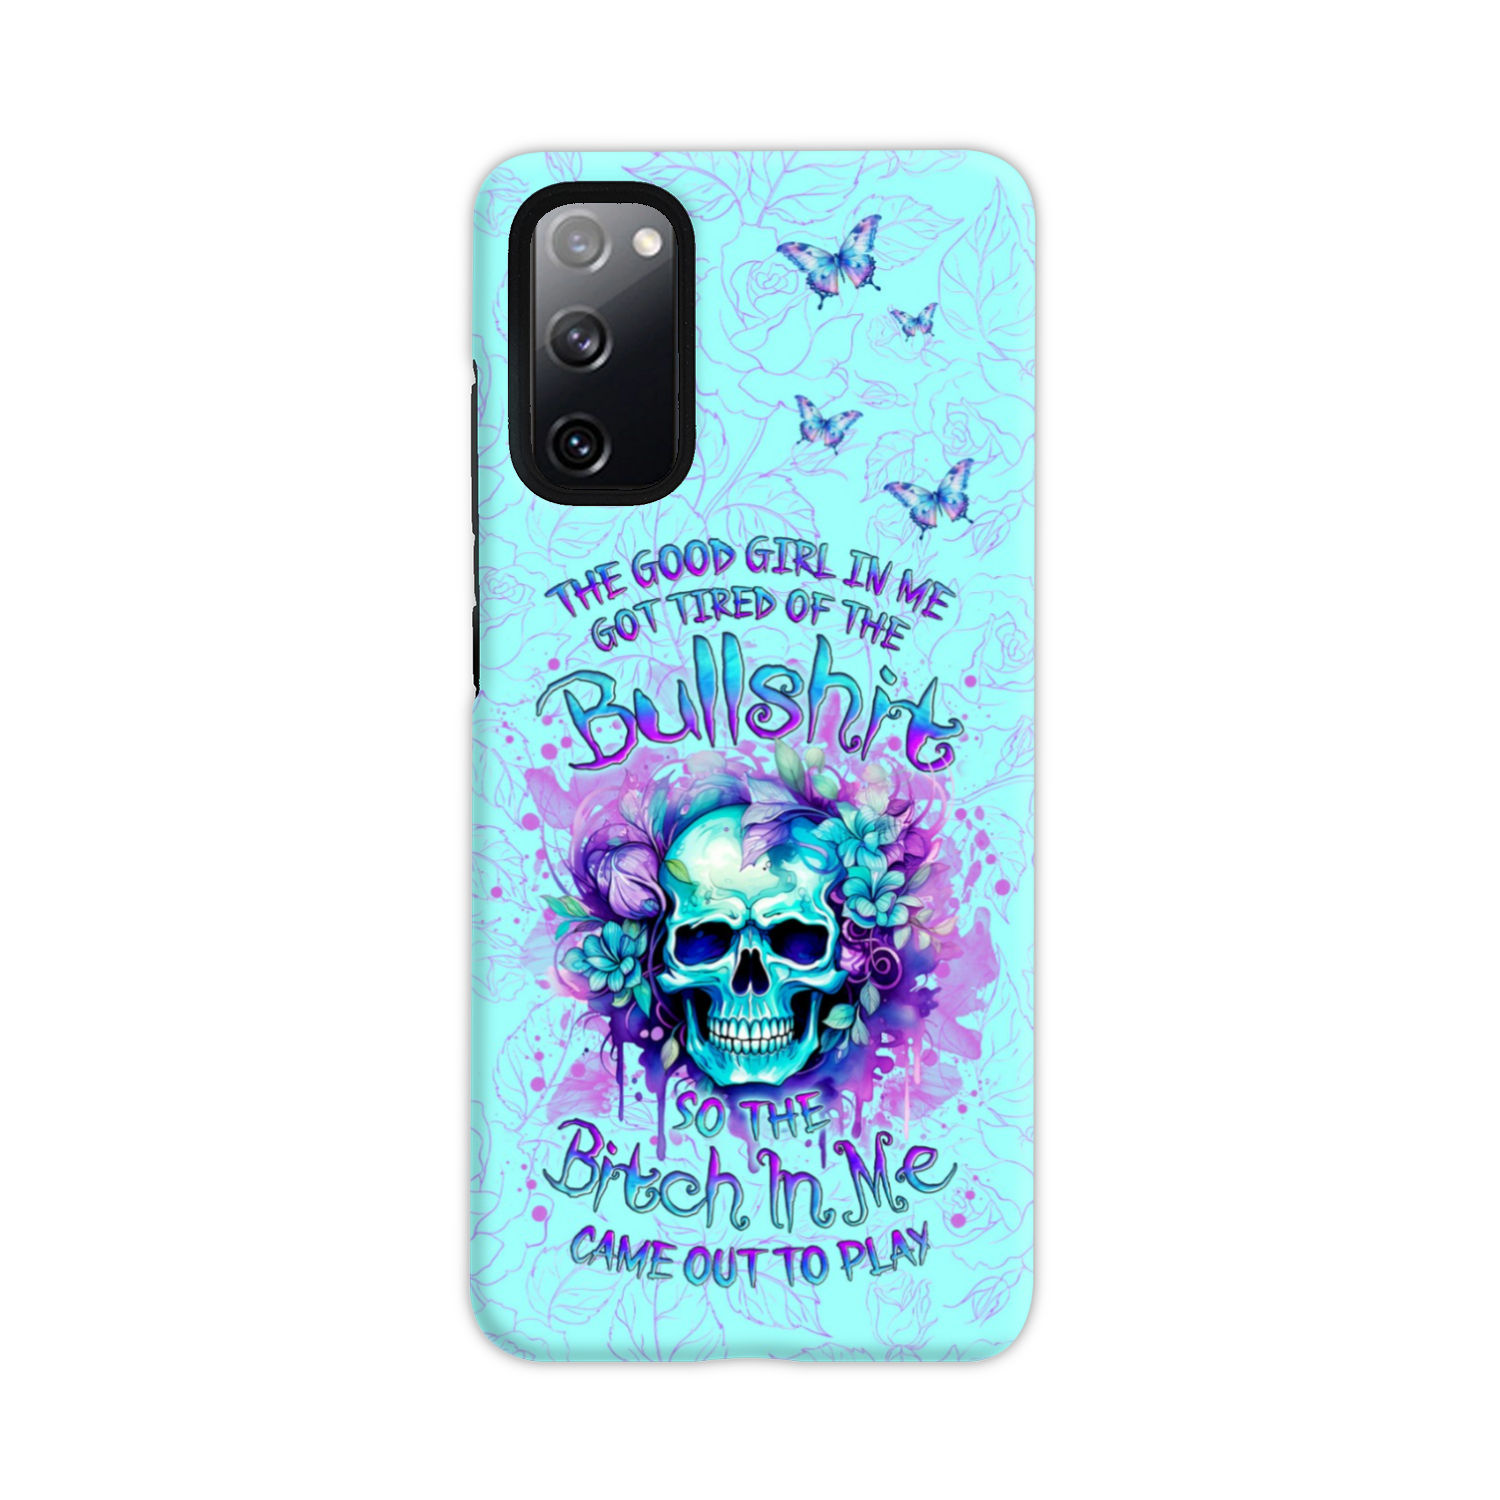 THE GOOD GIRL IN ME PHONE CASE - YHLN1511235